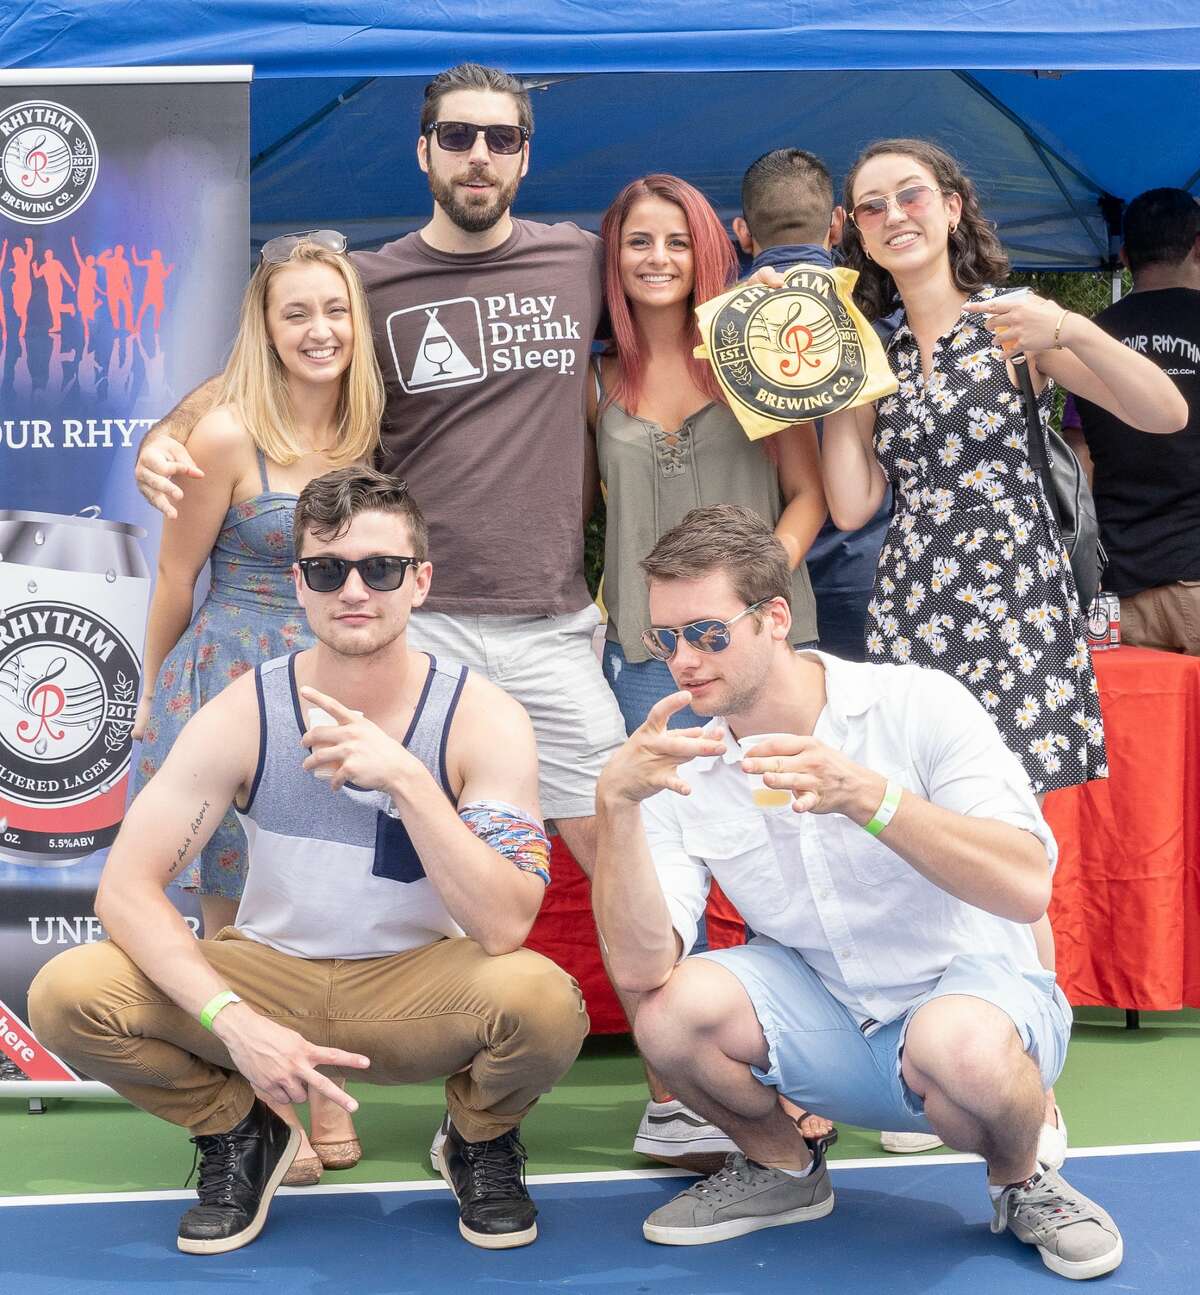 The CT Open was held at the Connecticut Tennis Center at Yale in New Haven August 17-25, 2018. A Beerfest was held on August 25. Were you SEEN? The CT Open was held at the Connecticut Tennis Center at Yale in New Haven August 17-25, 2018. A Beerfest was held on August 25. Were you SEEN?